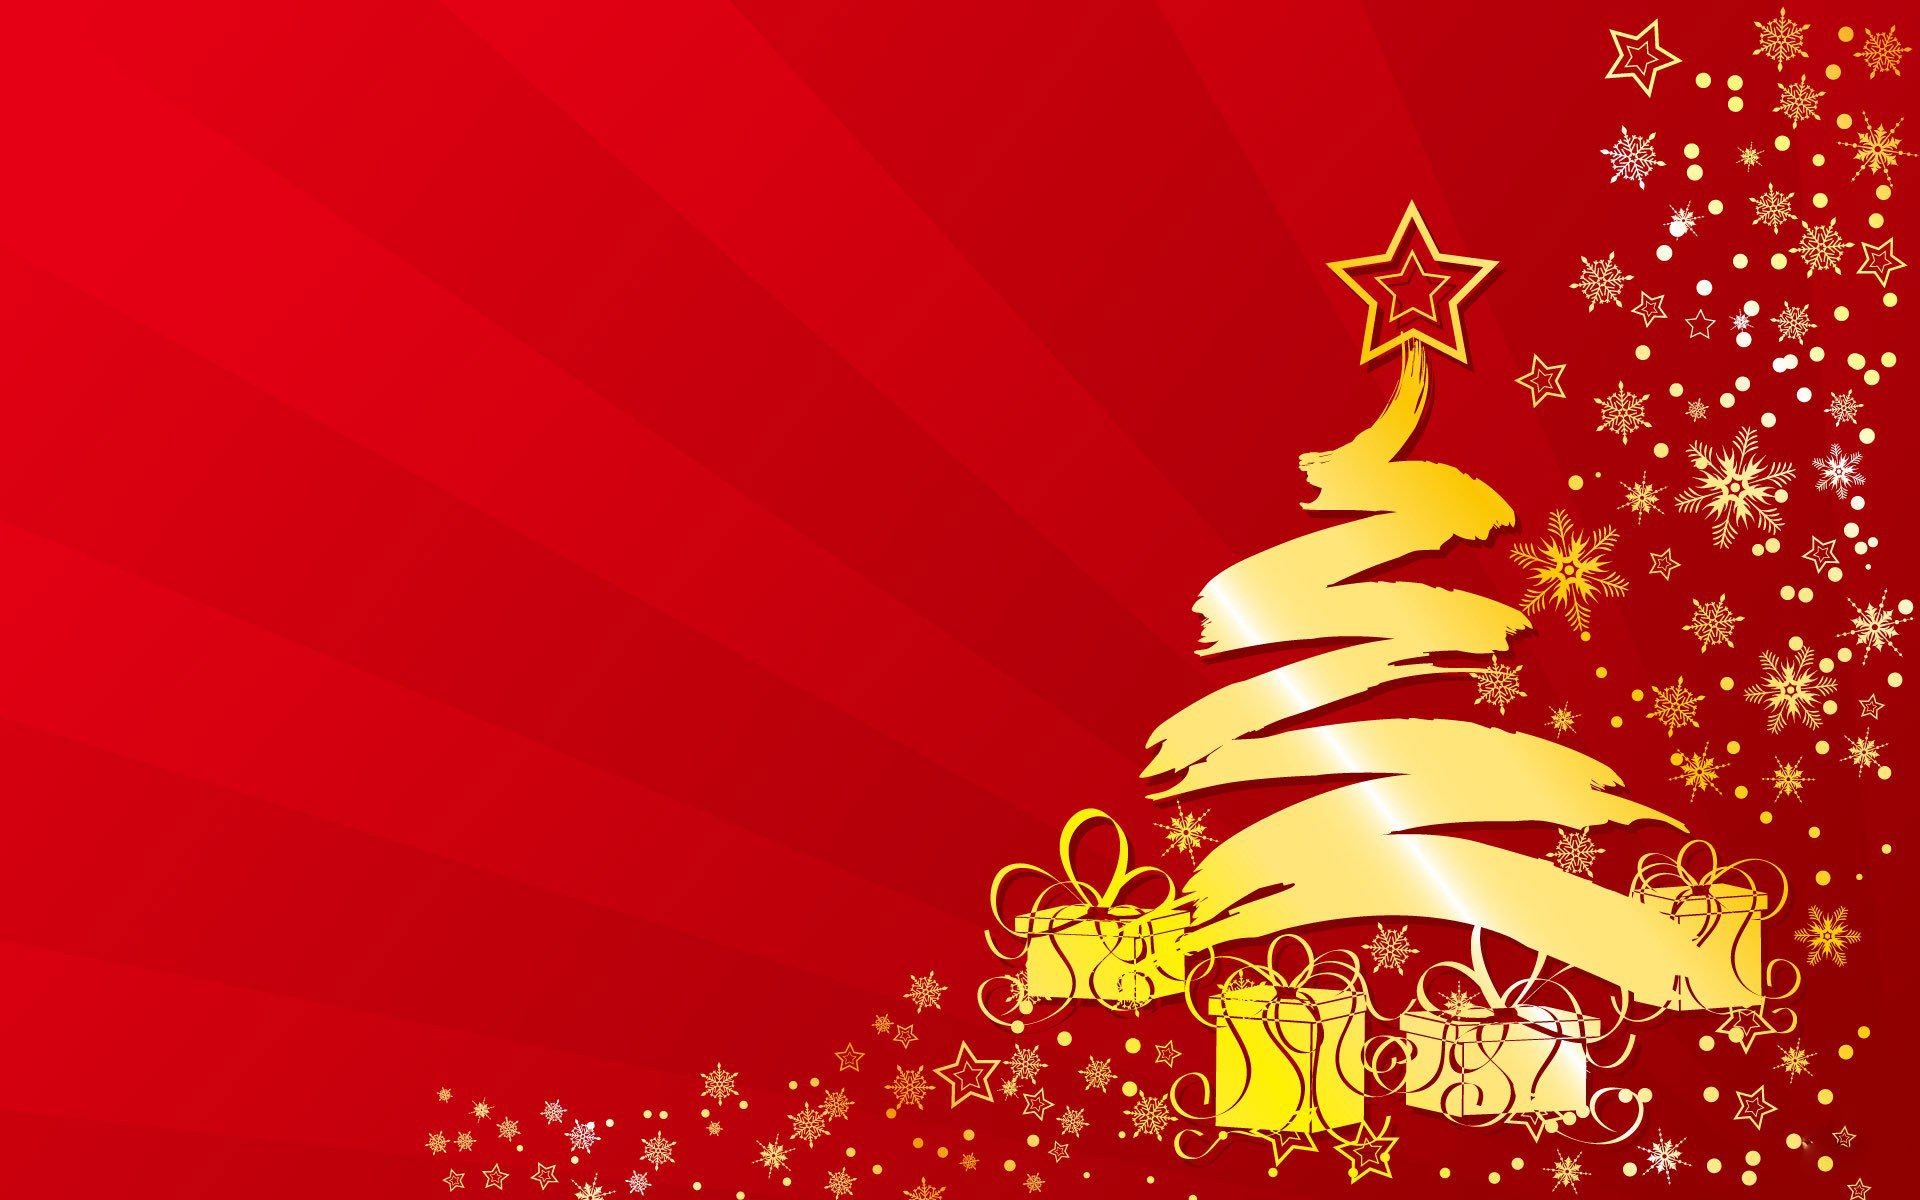 Golden tree on red background on Christmas